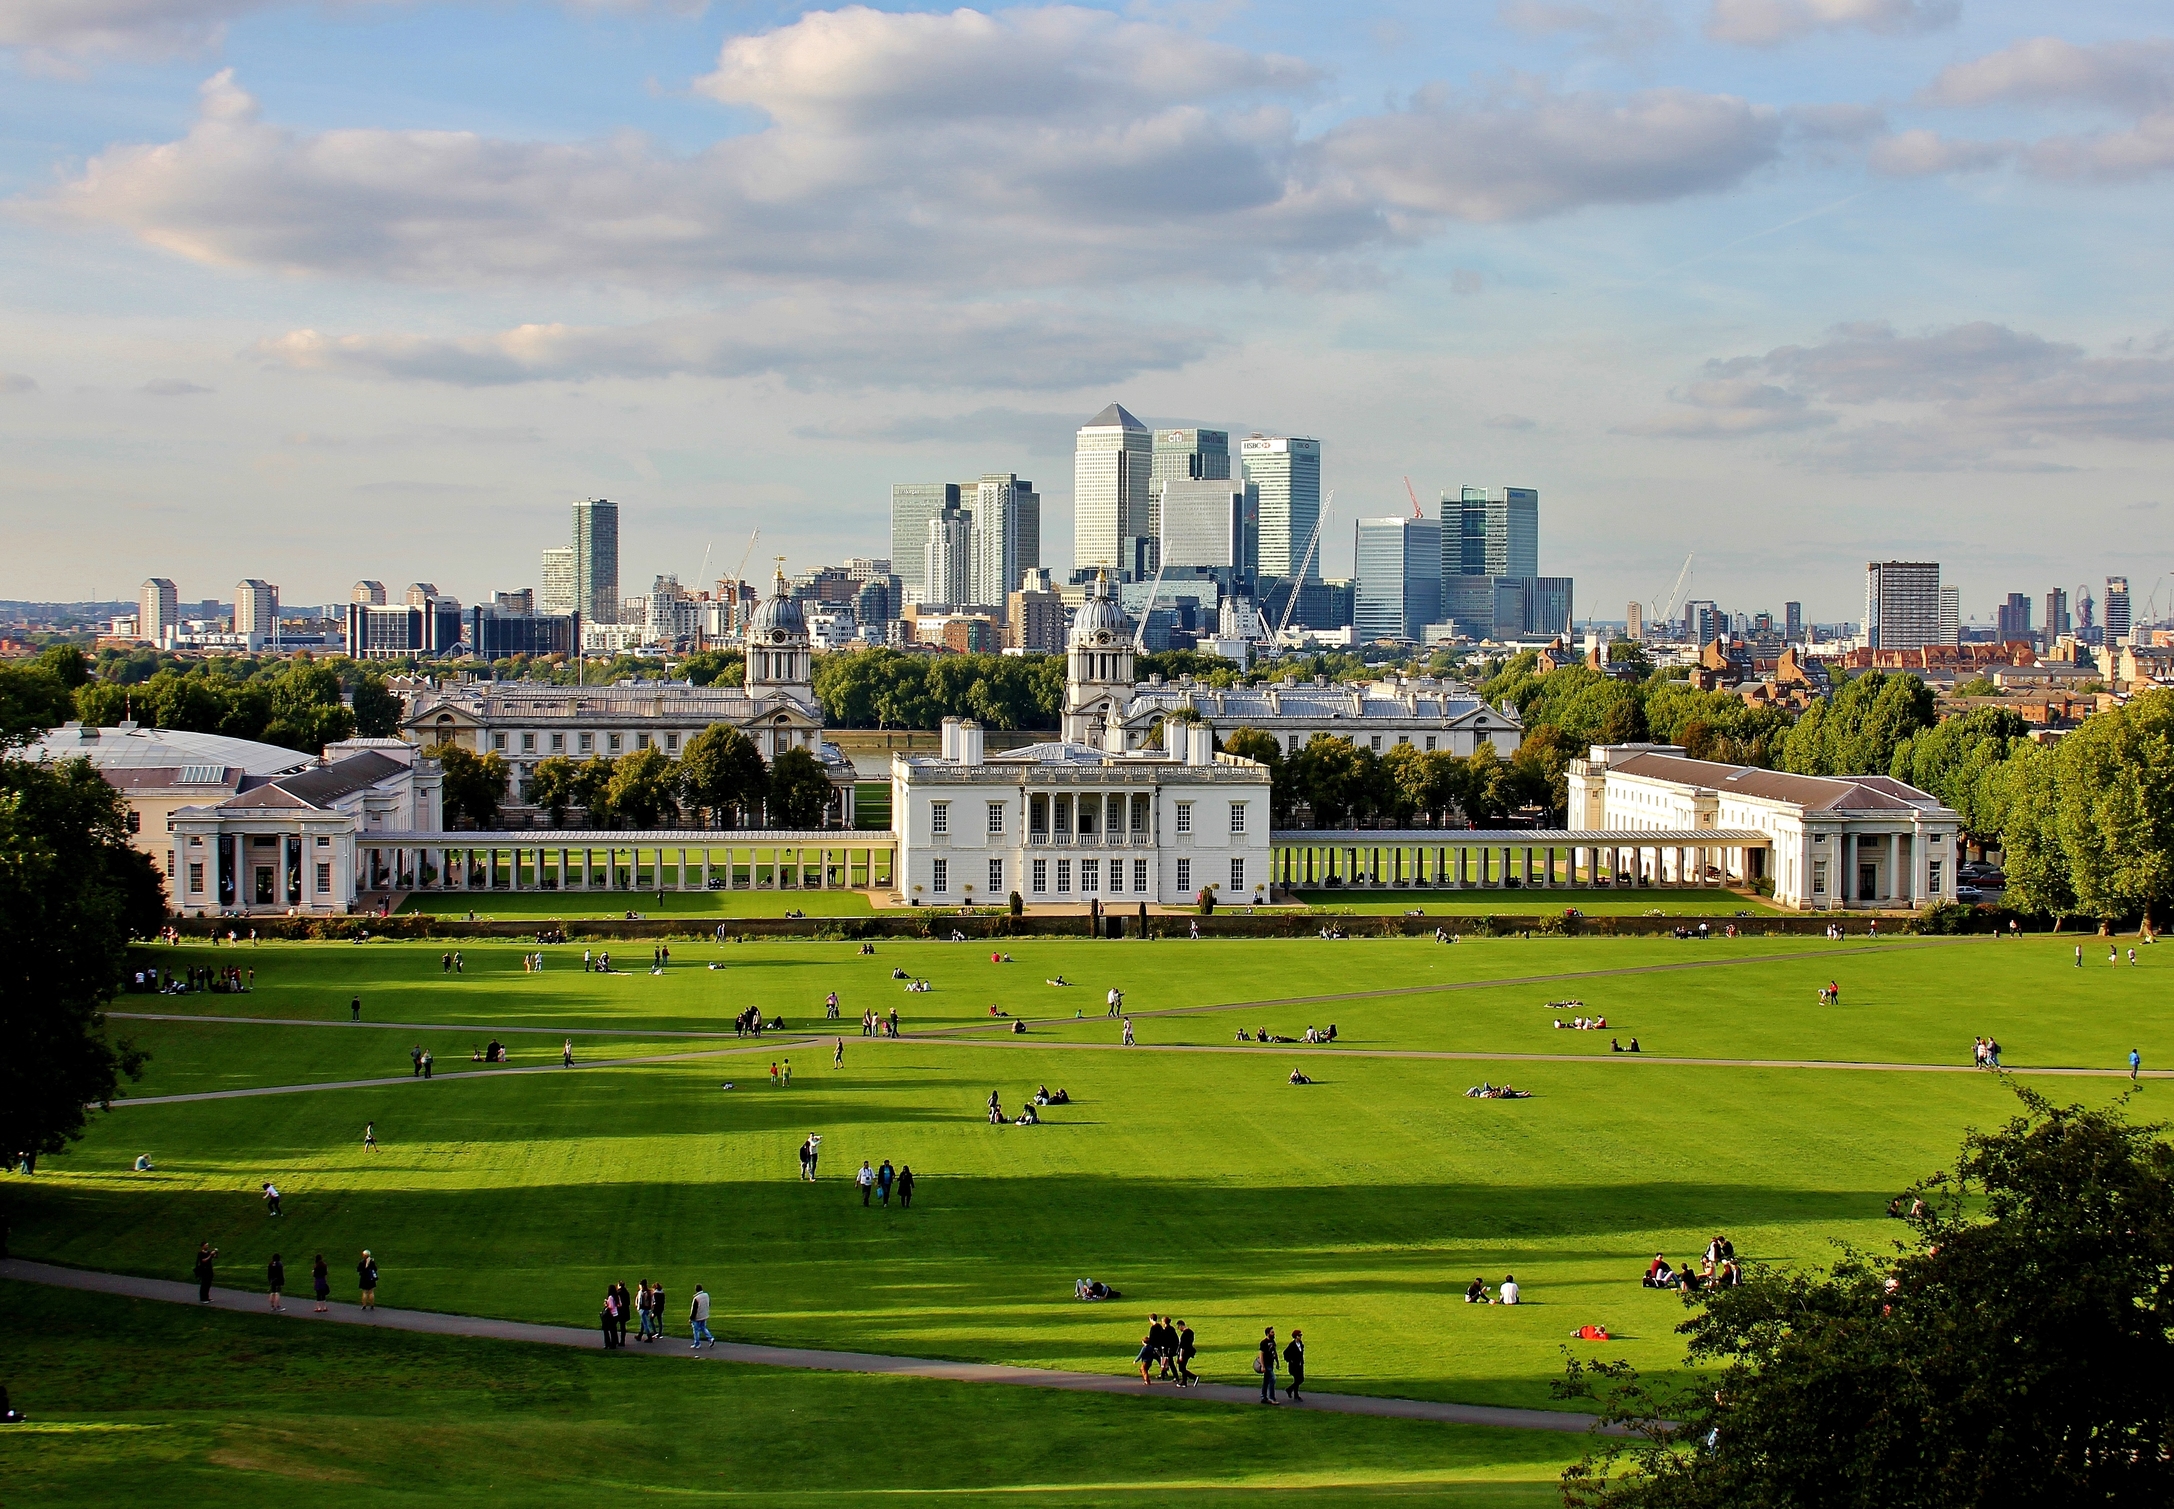 Panoramic view of London from the Royal Observatory in Greenwich